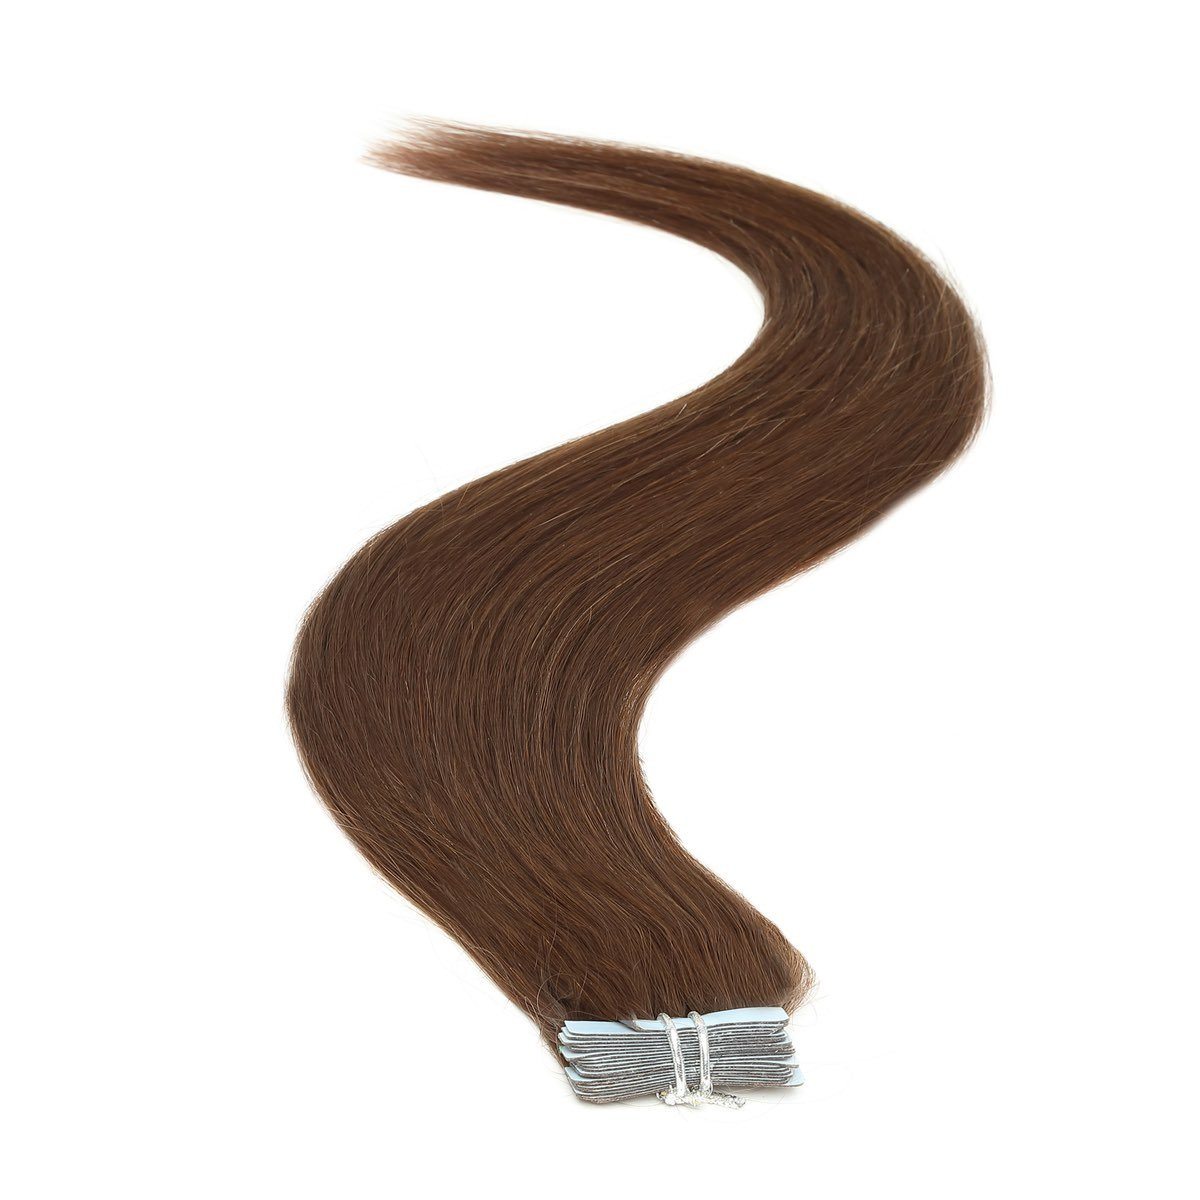 Tape in Hair Extensions | 18 inch | 20ps | 50g | Mocha Brown (4) - Beauty Hair Products LtdHair Extensions